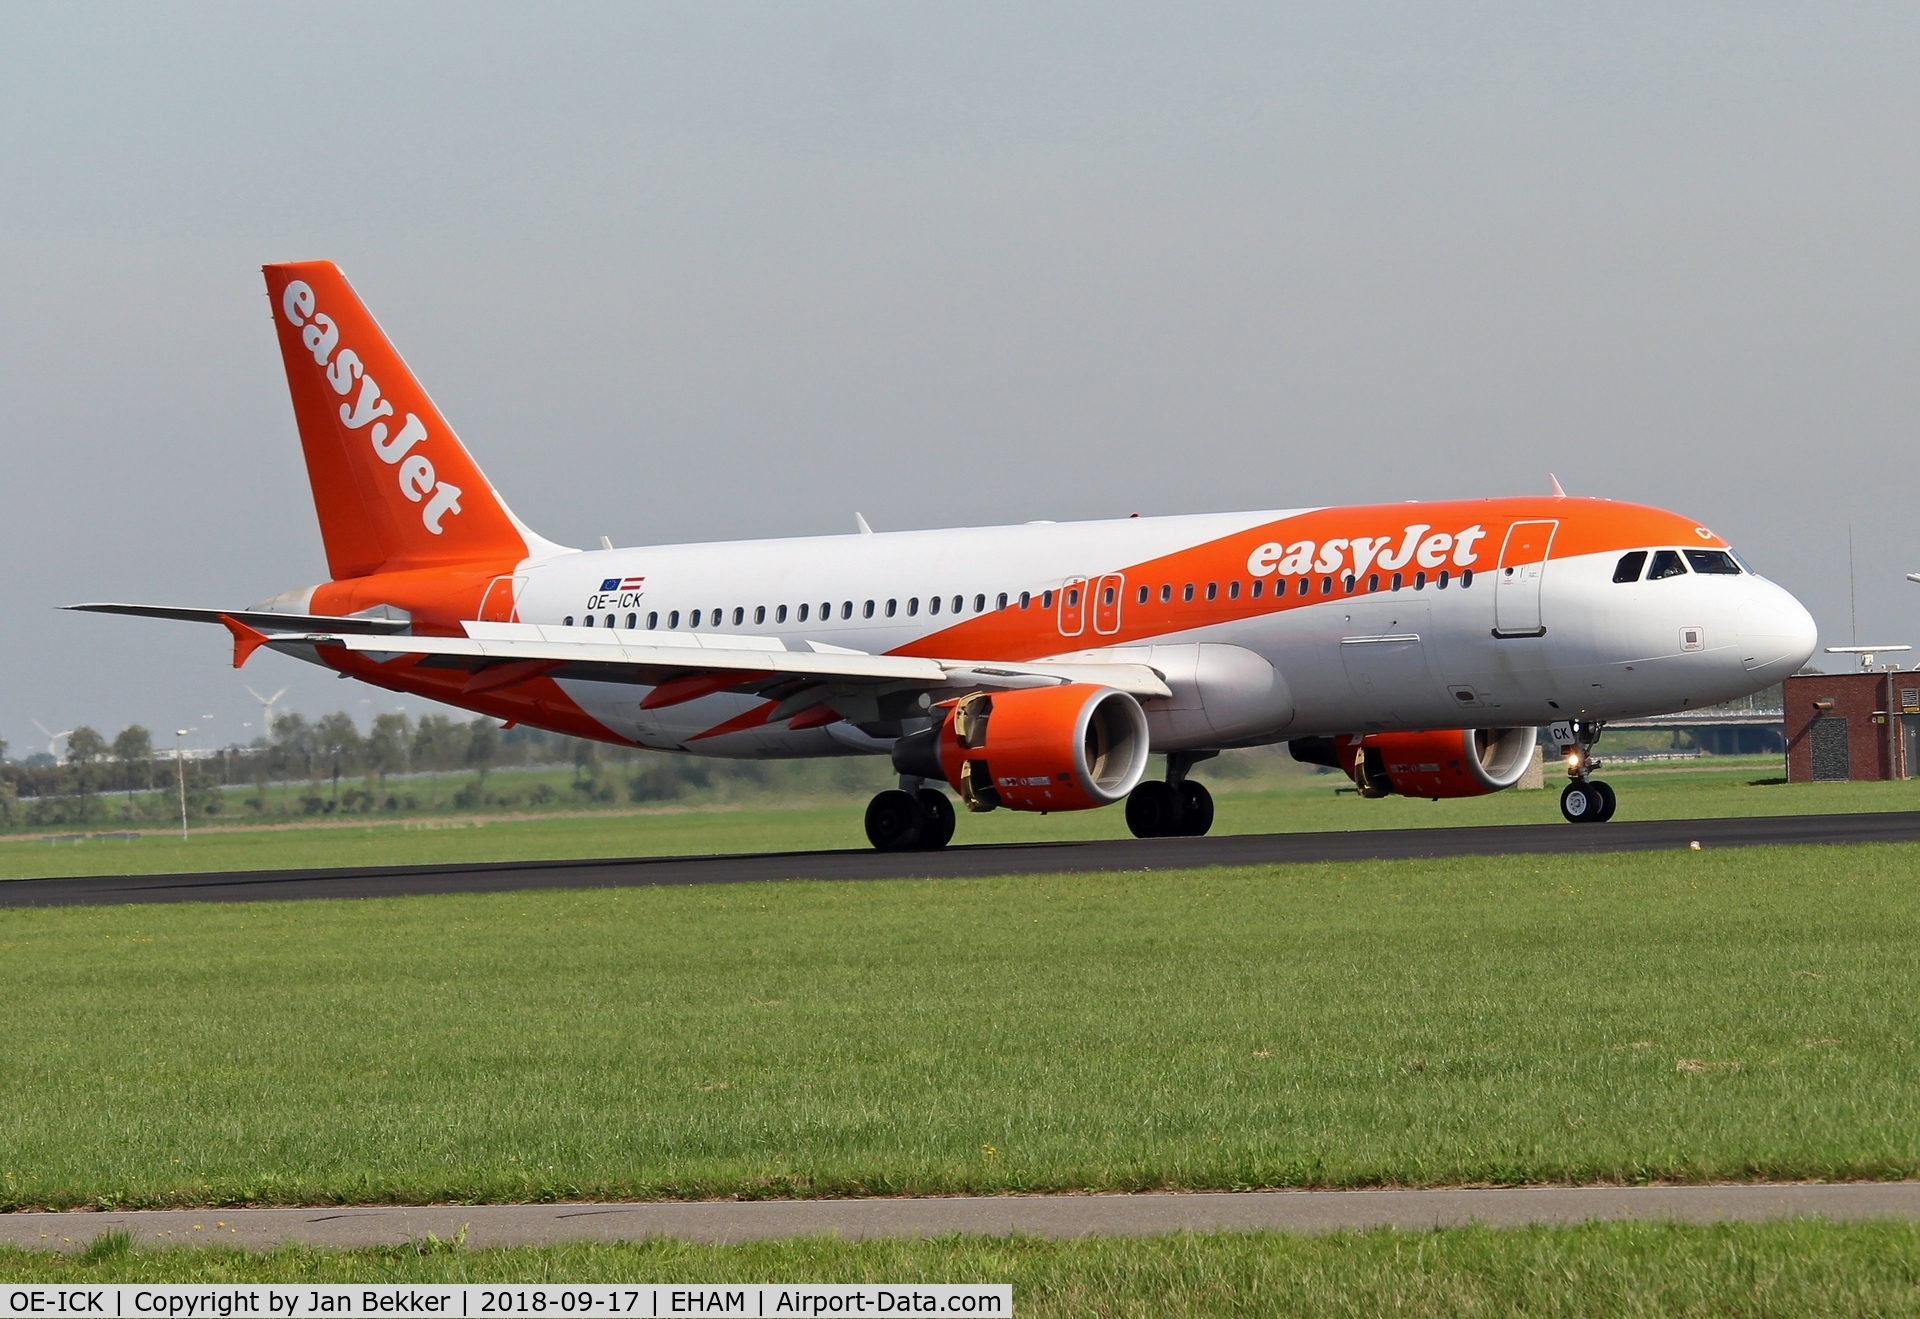 OE-ICK, 2012 Airbus A320-214 C/N 5020, Schiphol Amsterdam